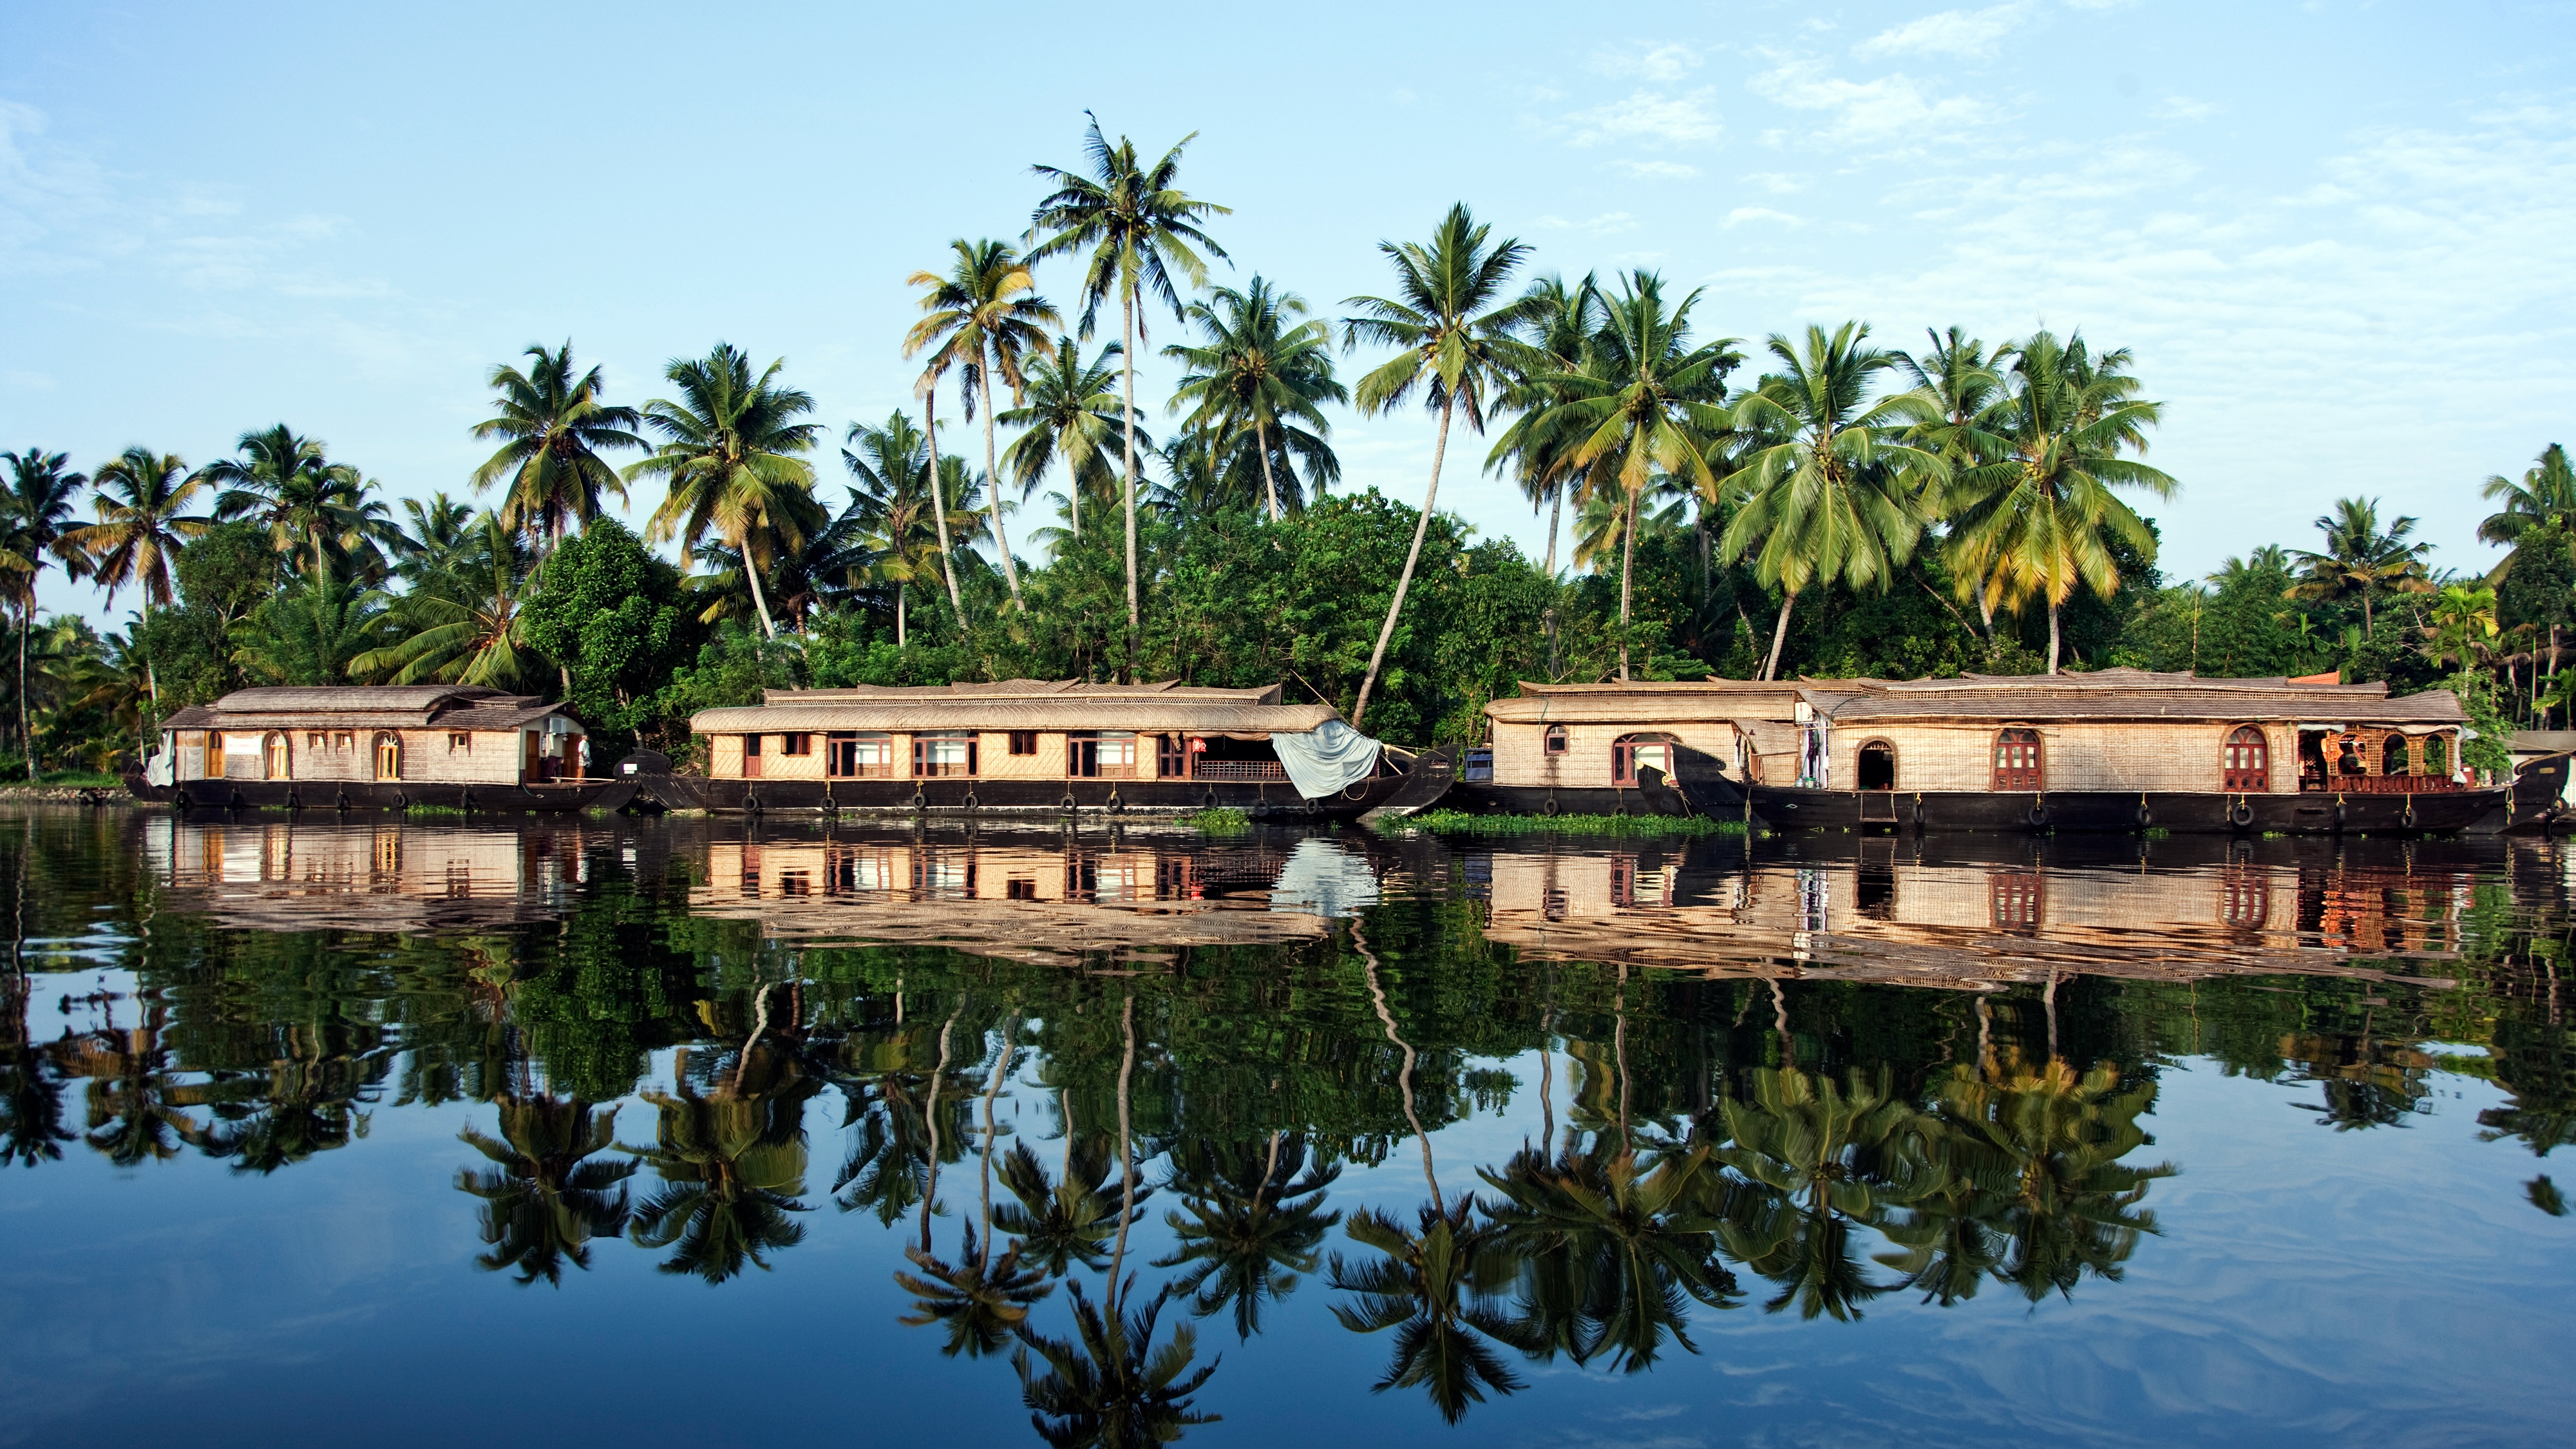 Houseboats in the backwaters in Alappuzha, Kerala, India by Martin Harvey